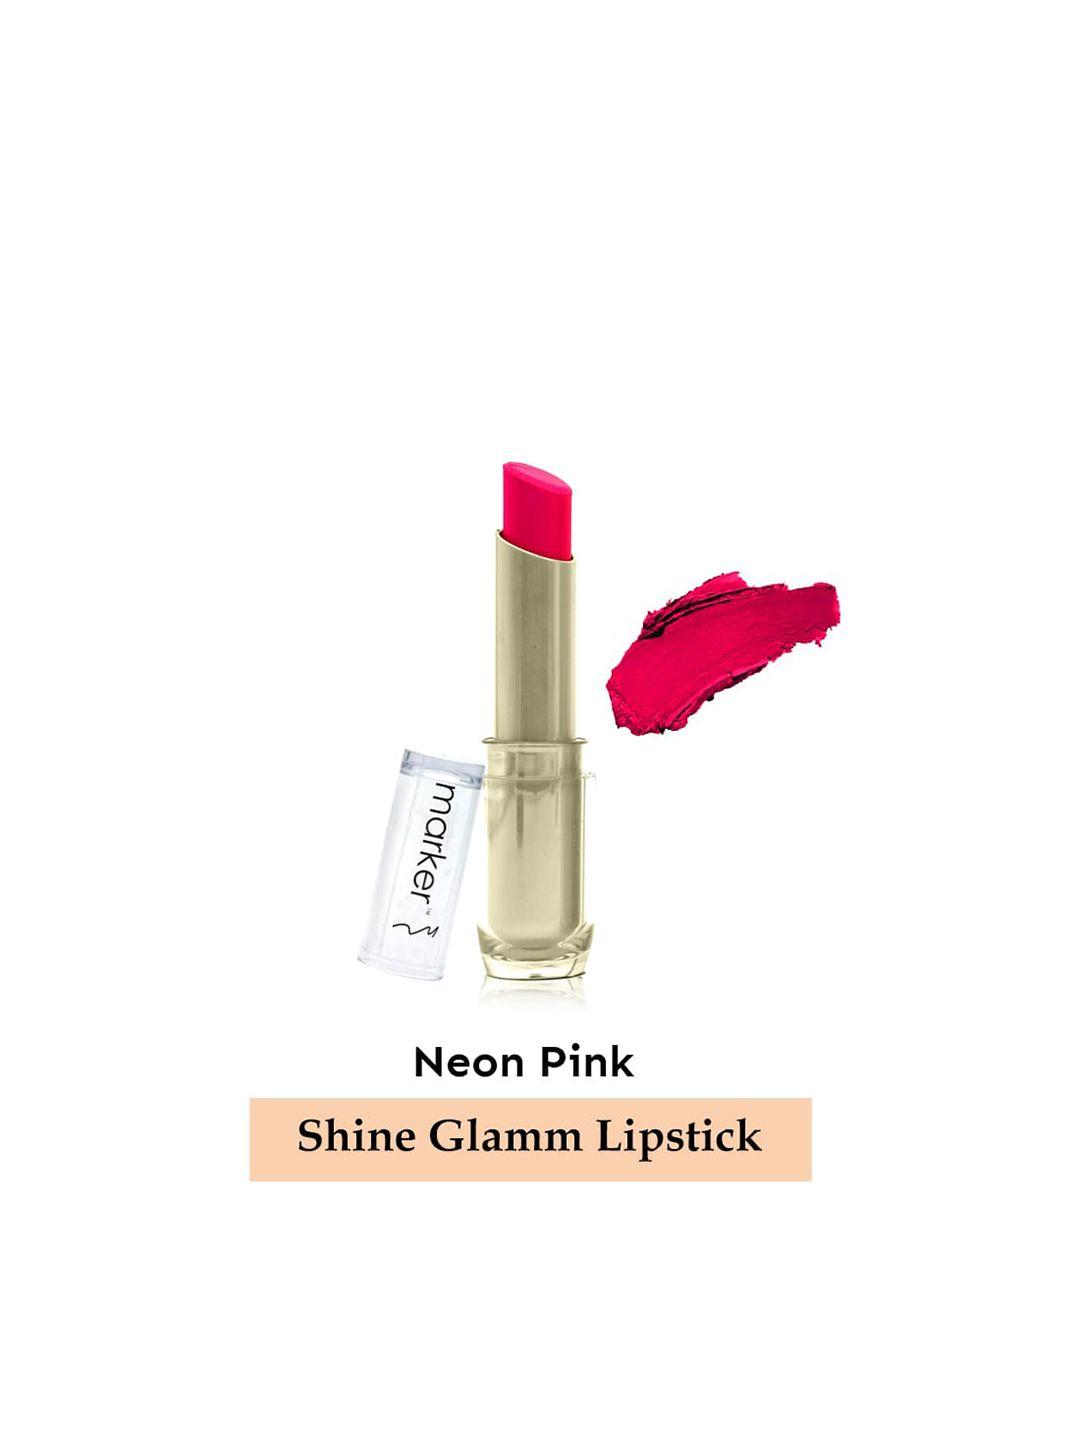 beautyrelay london shine glamm lipstick with olive oil 3.5 g-neon pink